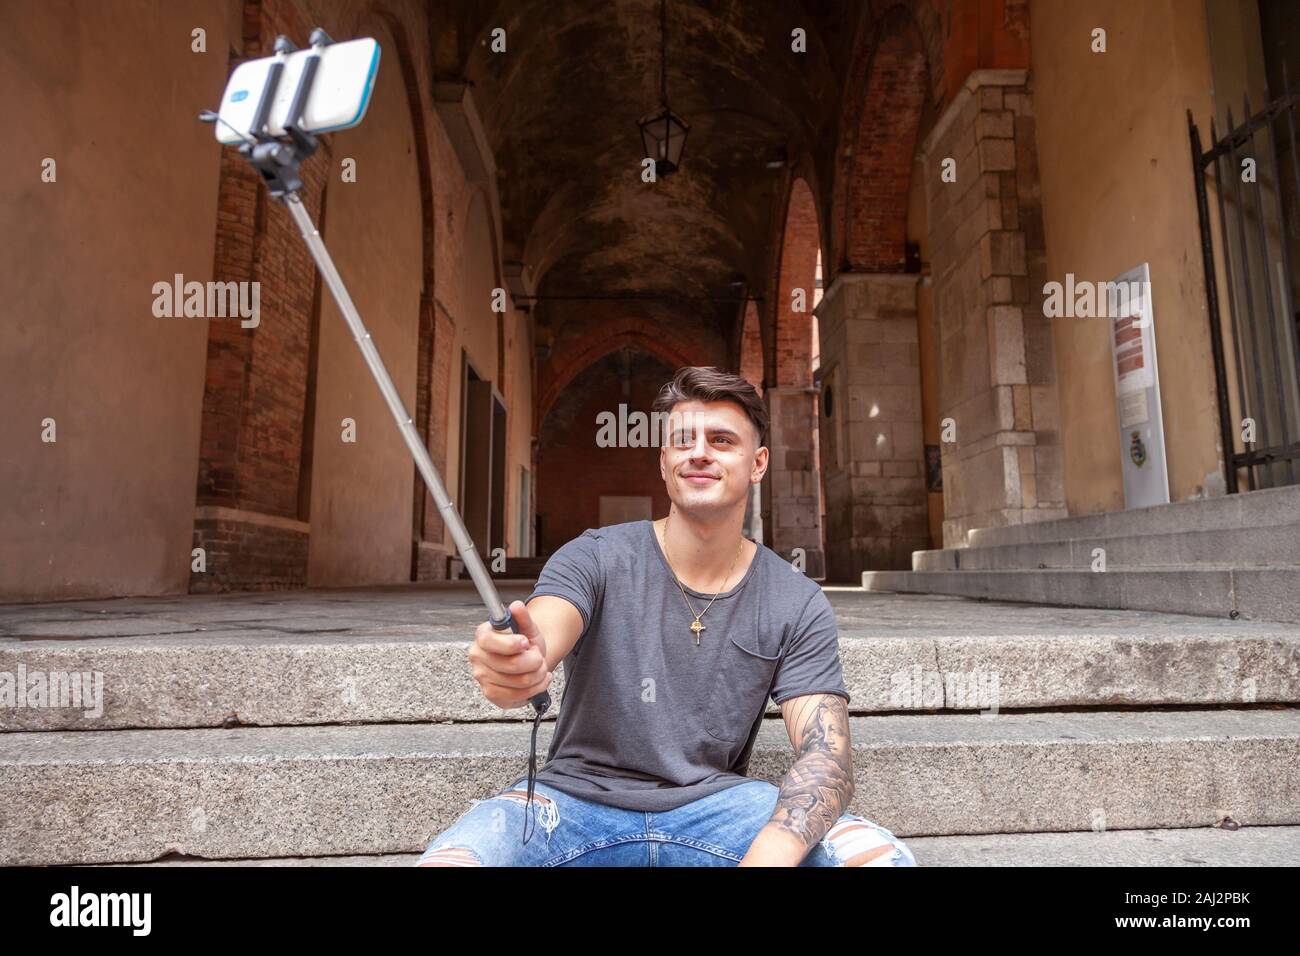 young of the millennium generation taking a selfie in a city of art. technological concept with always connected millennials Stock Photo